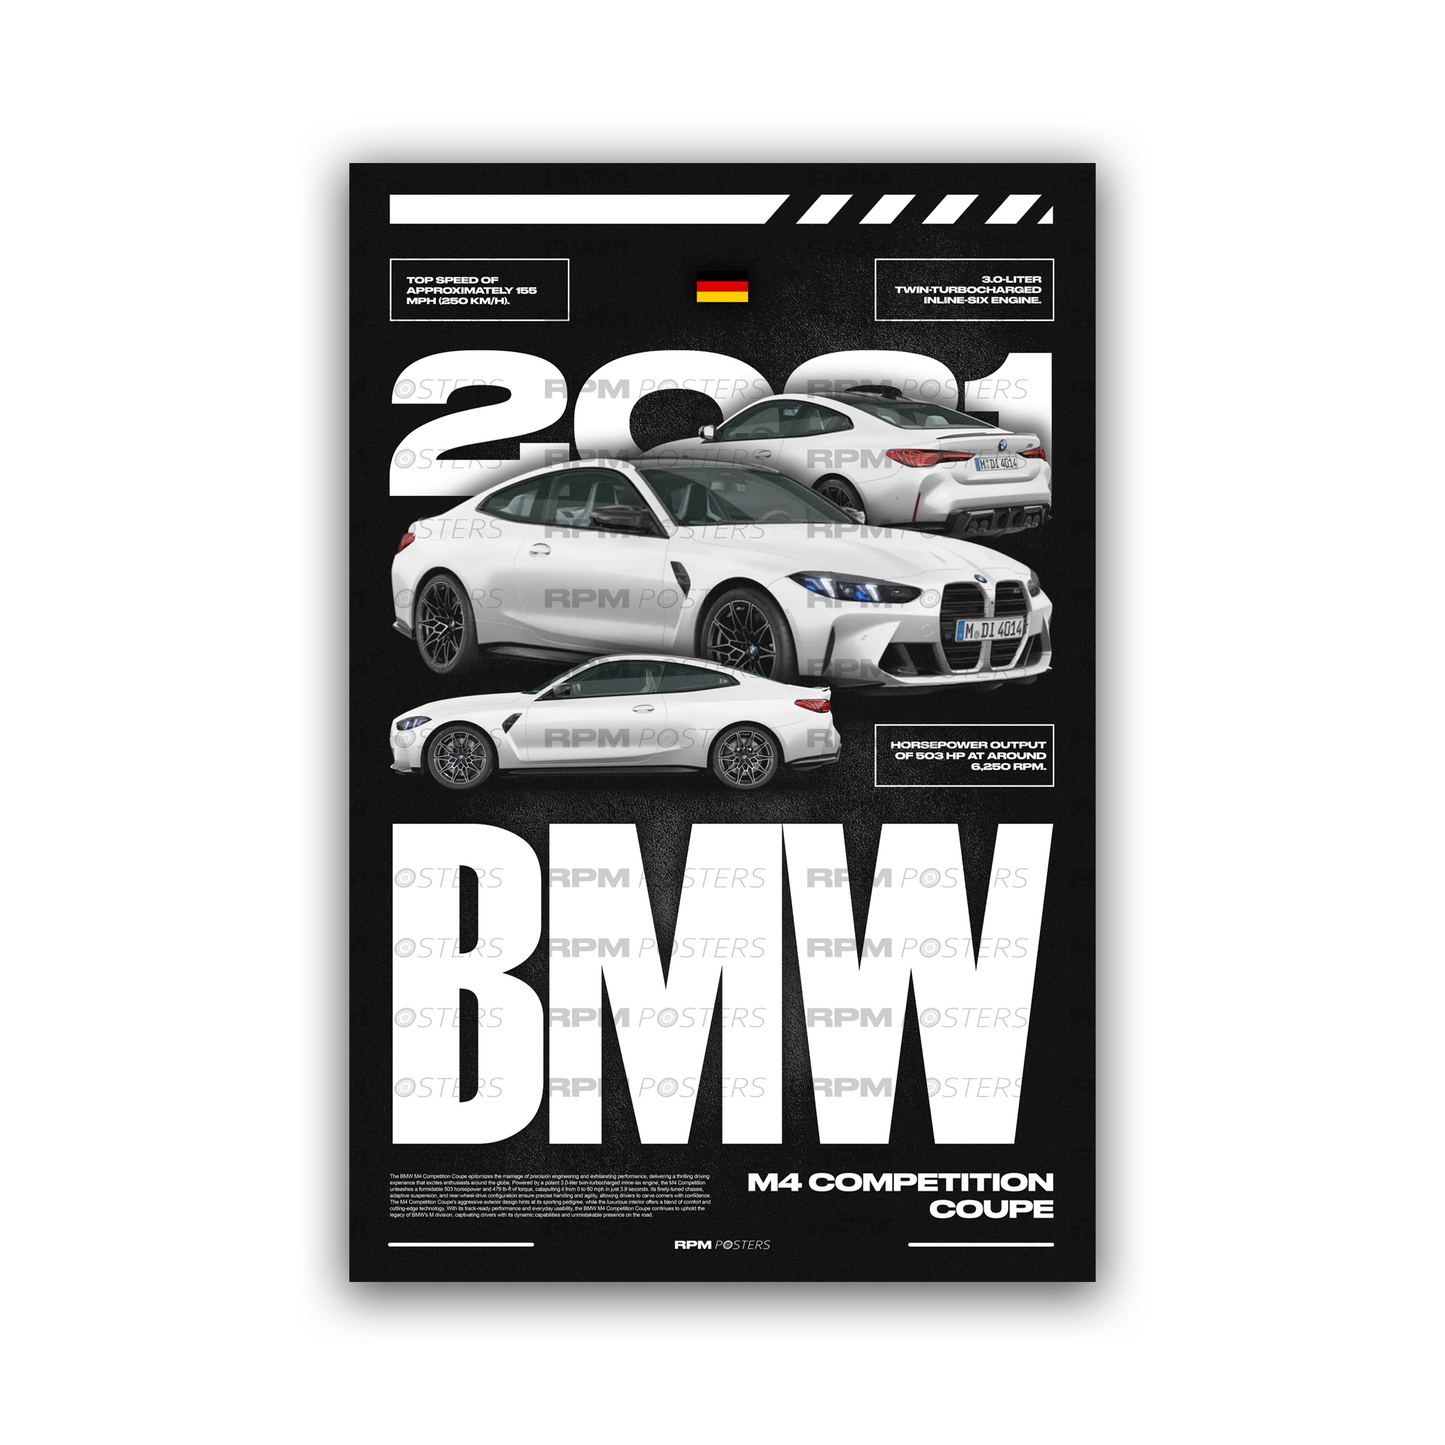 BMW M4 COMPETITION COUPE POSTER